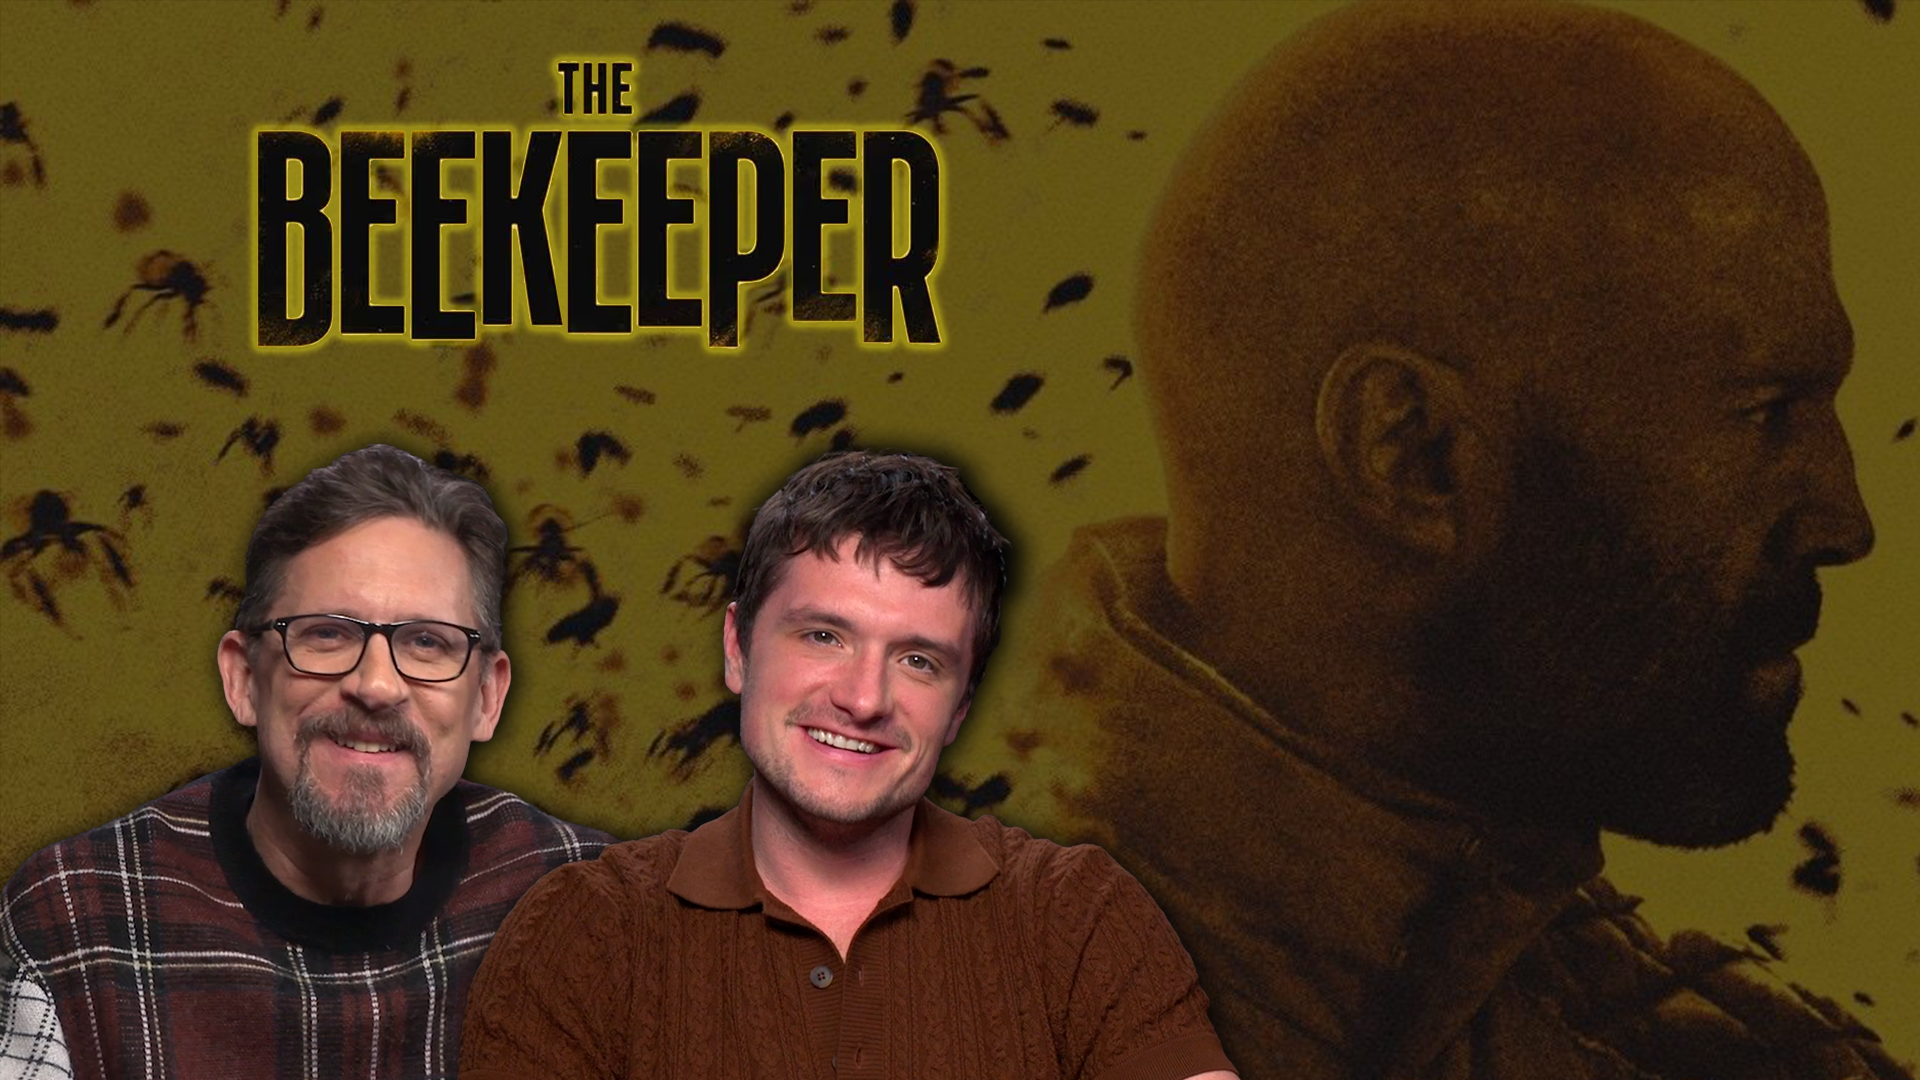 osh Hutcherson and David Ayer smile at the camera. A giant yellow poster of the 'Beekeeper' with a close up of Jason Statham standing among a swarm of bees is their background.